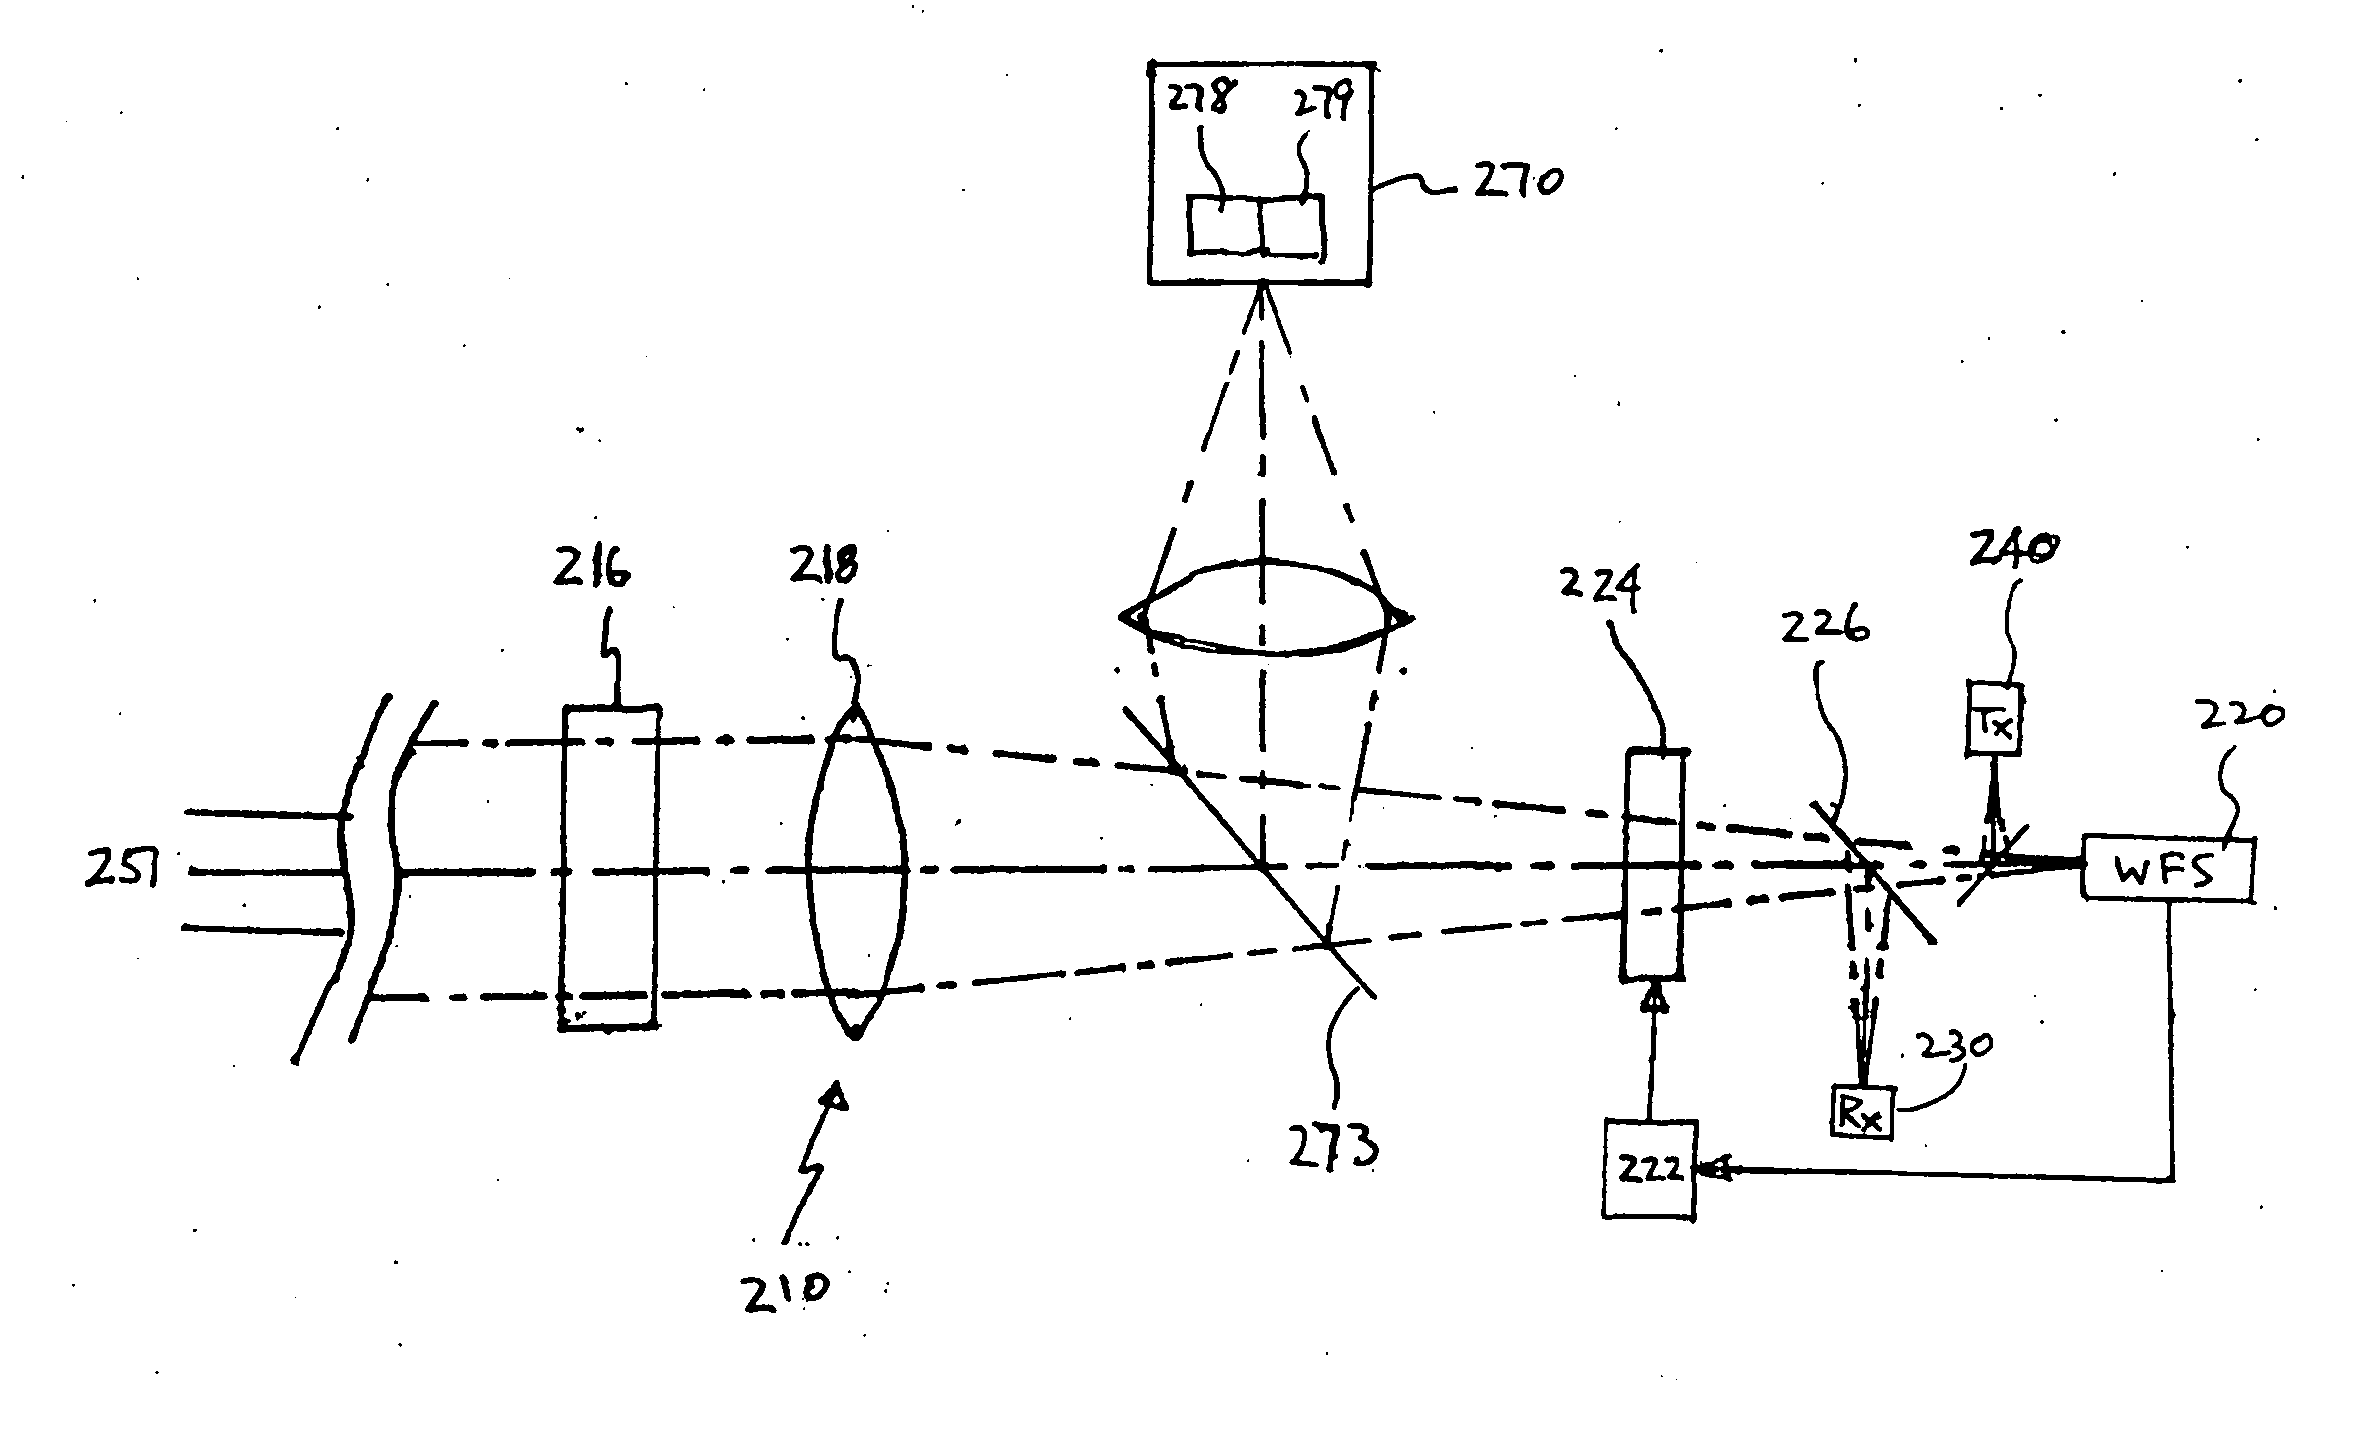 Data port alignment of free space optical communications terminal with adaptive optics